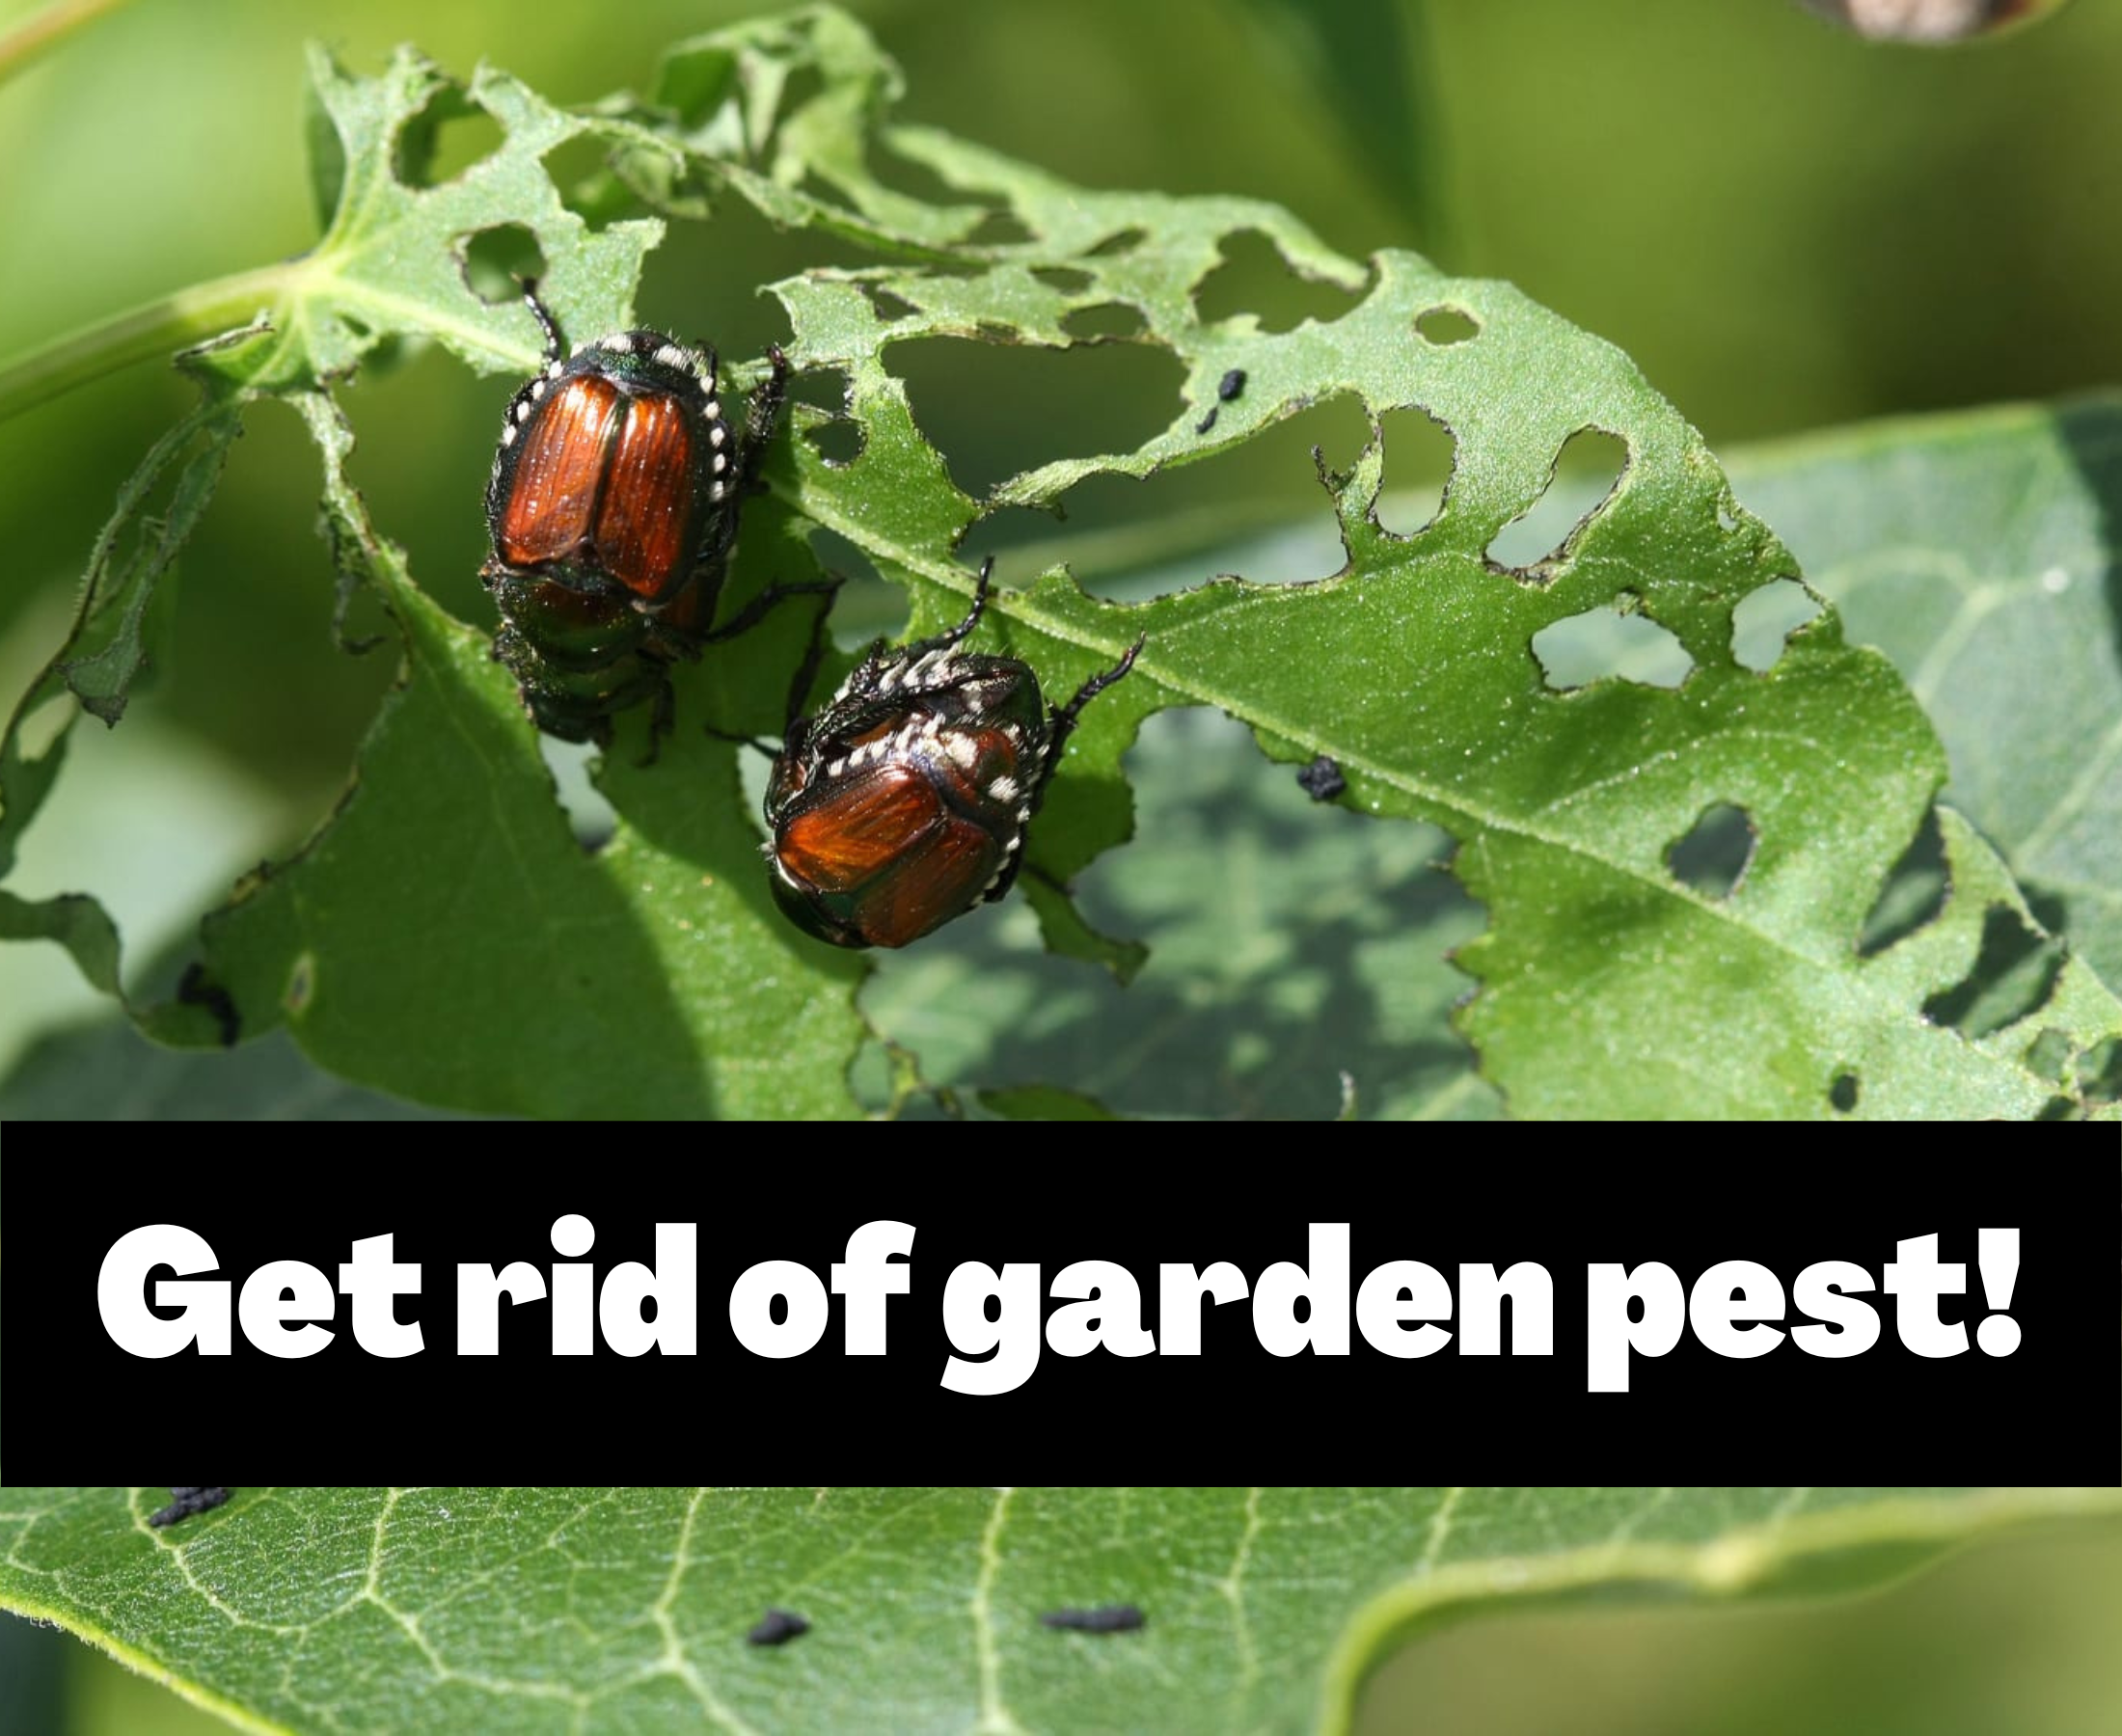 How to get rid of garden pests naturally?